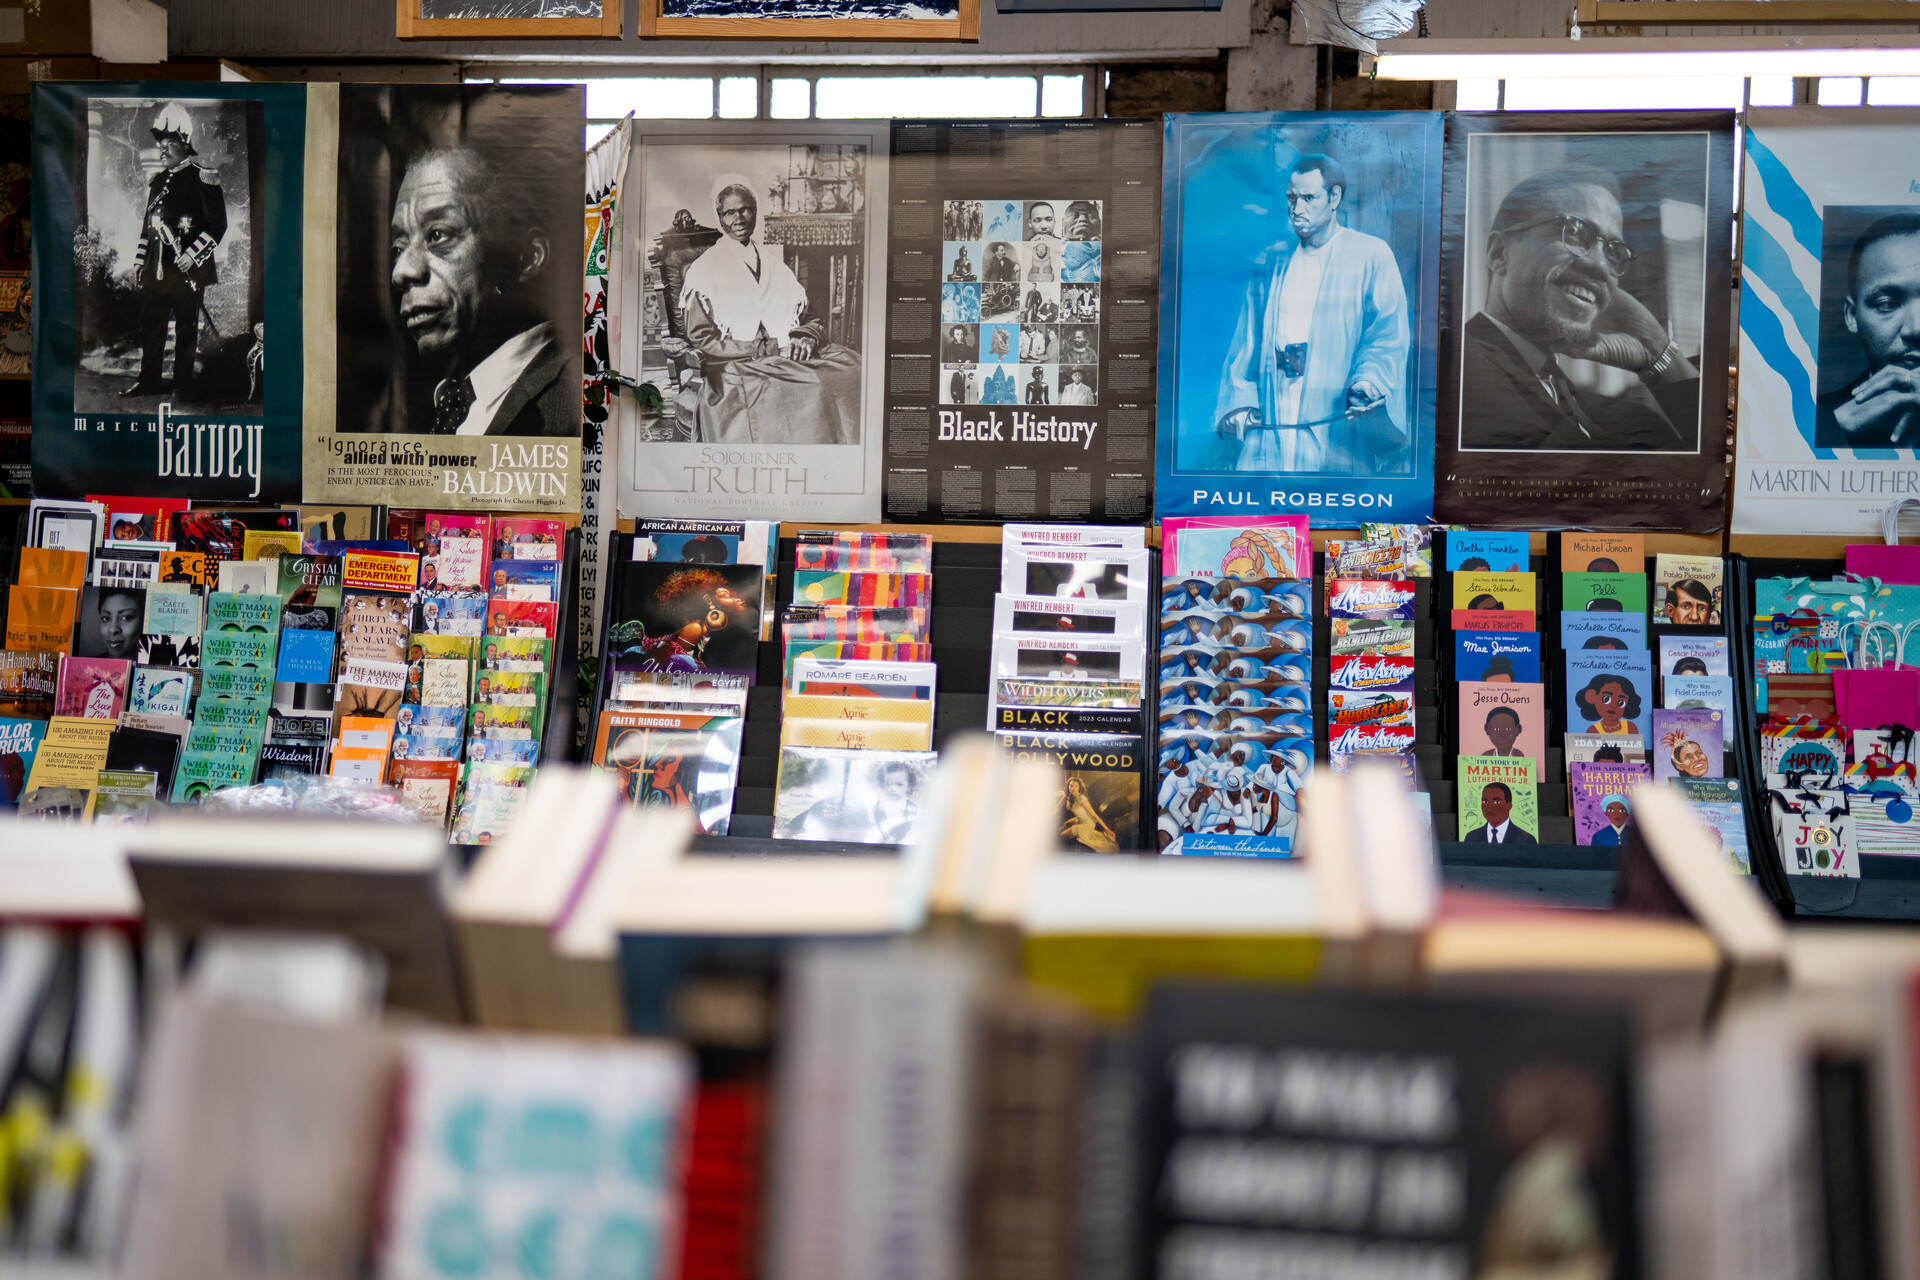 Inside a bookstore, a wall is covered in colorful imagery and black and white posters of historic figures such as James Baldwin, Paul Robeson, Malcolm X and Martin Luther King Jr.